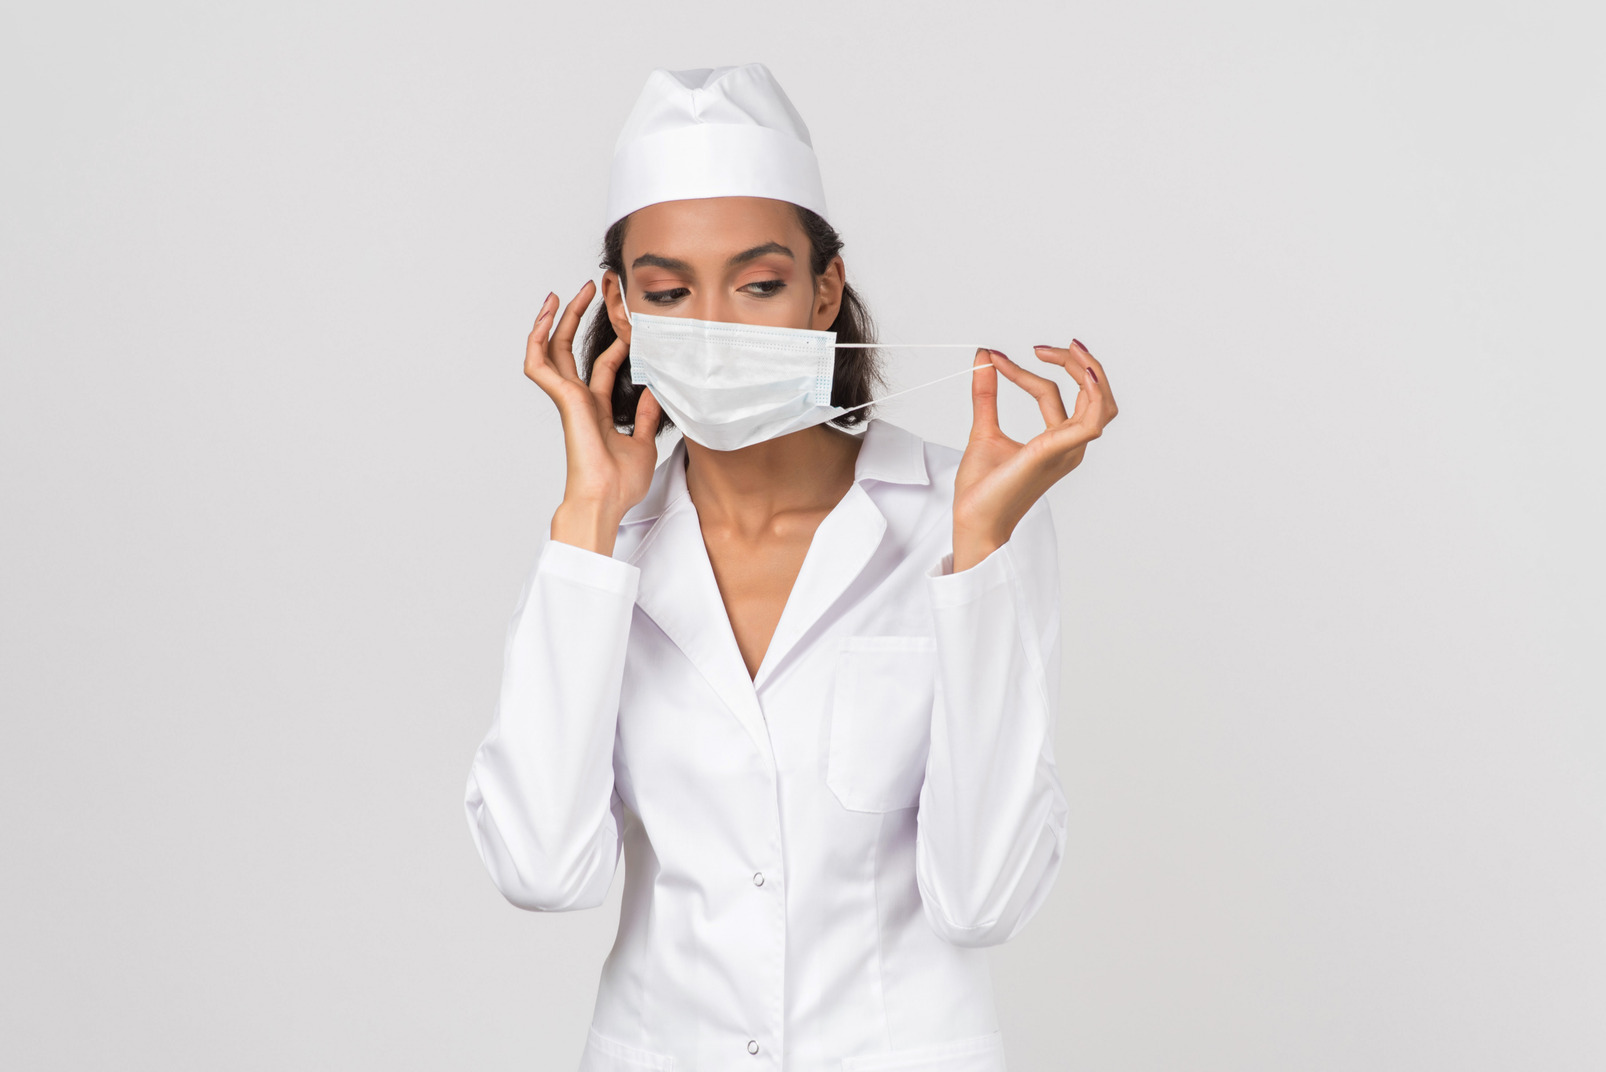 Attractive female doctor wearing a medical face mask